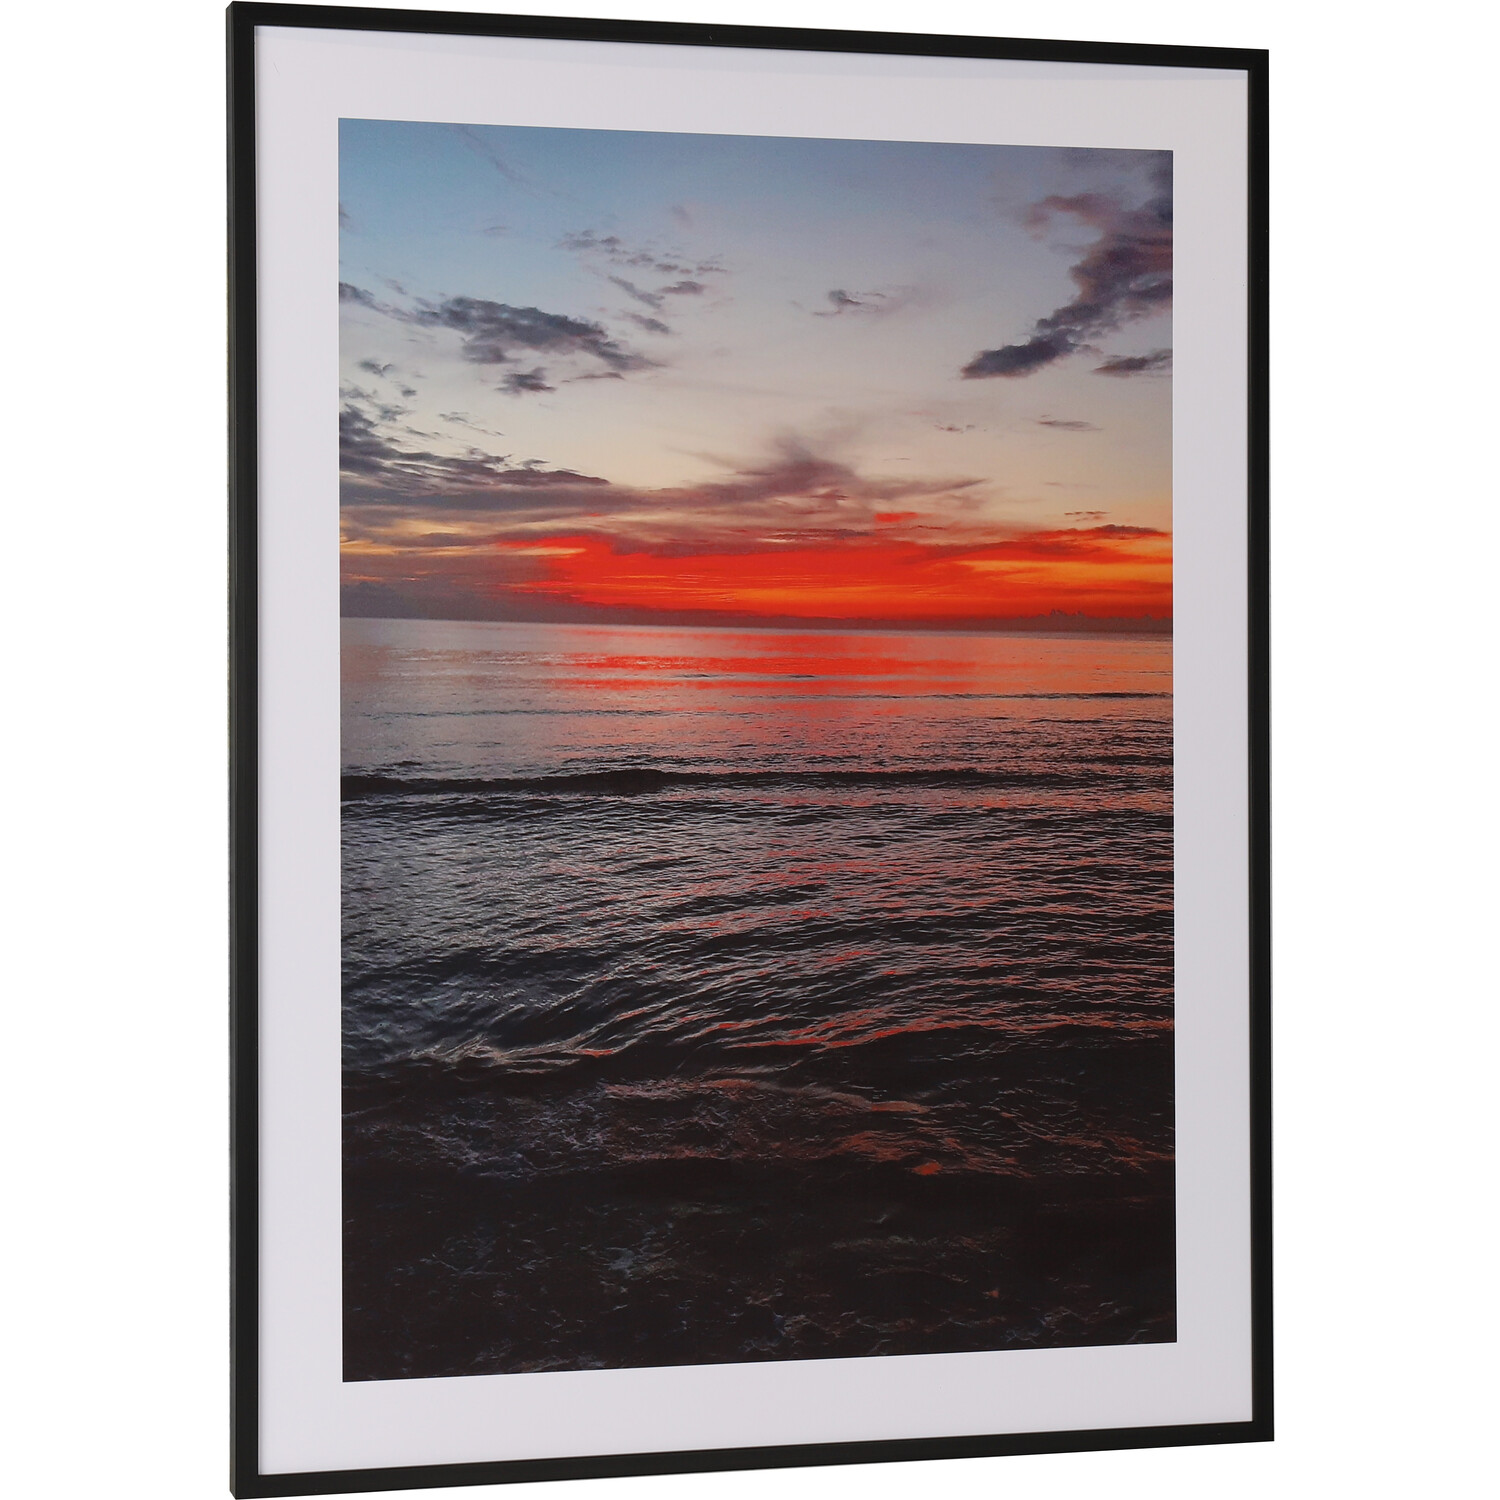 Sunset by the Sea Framed Print Image 2